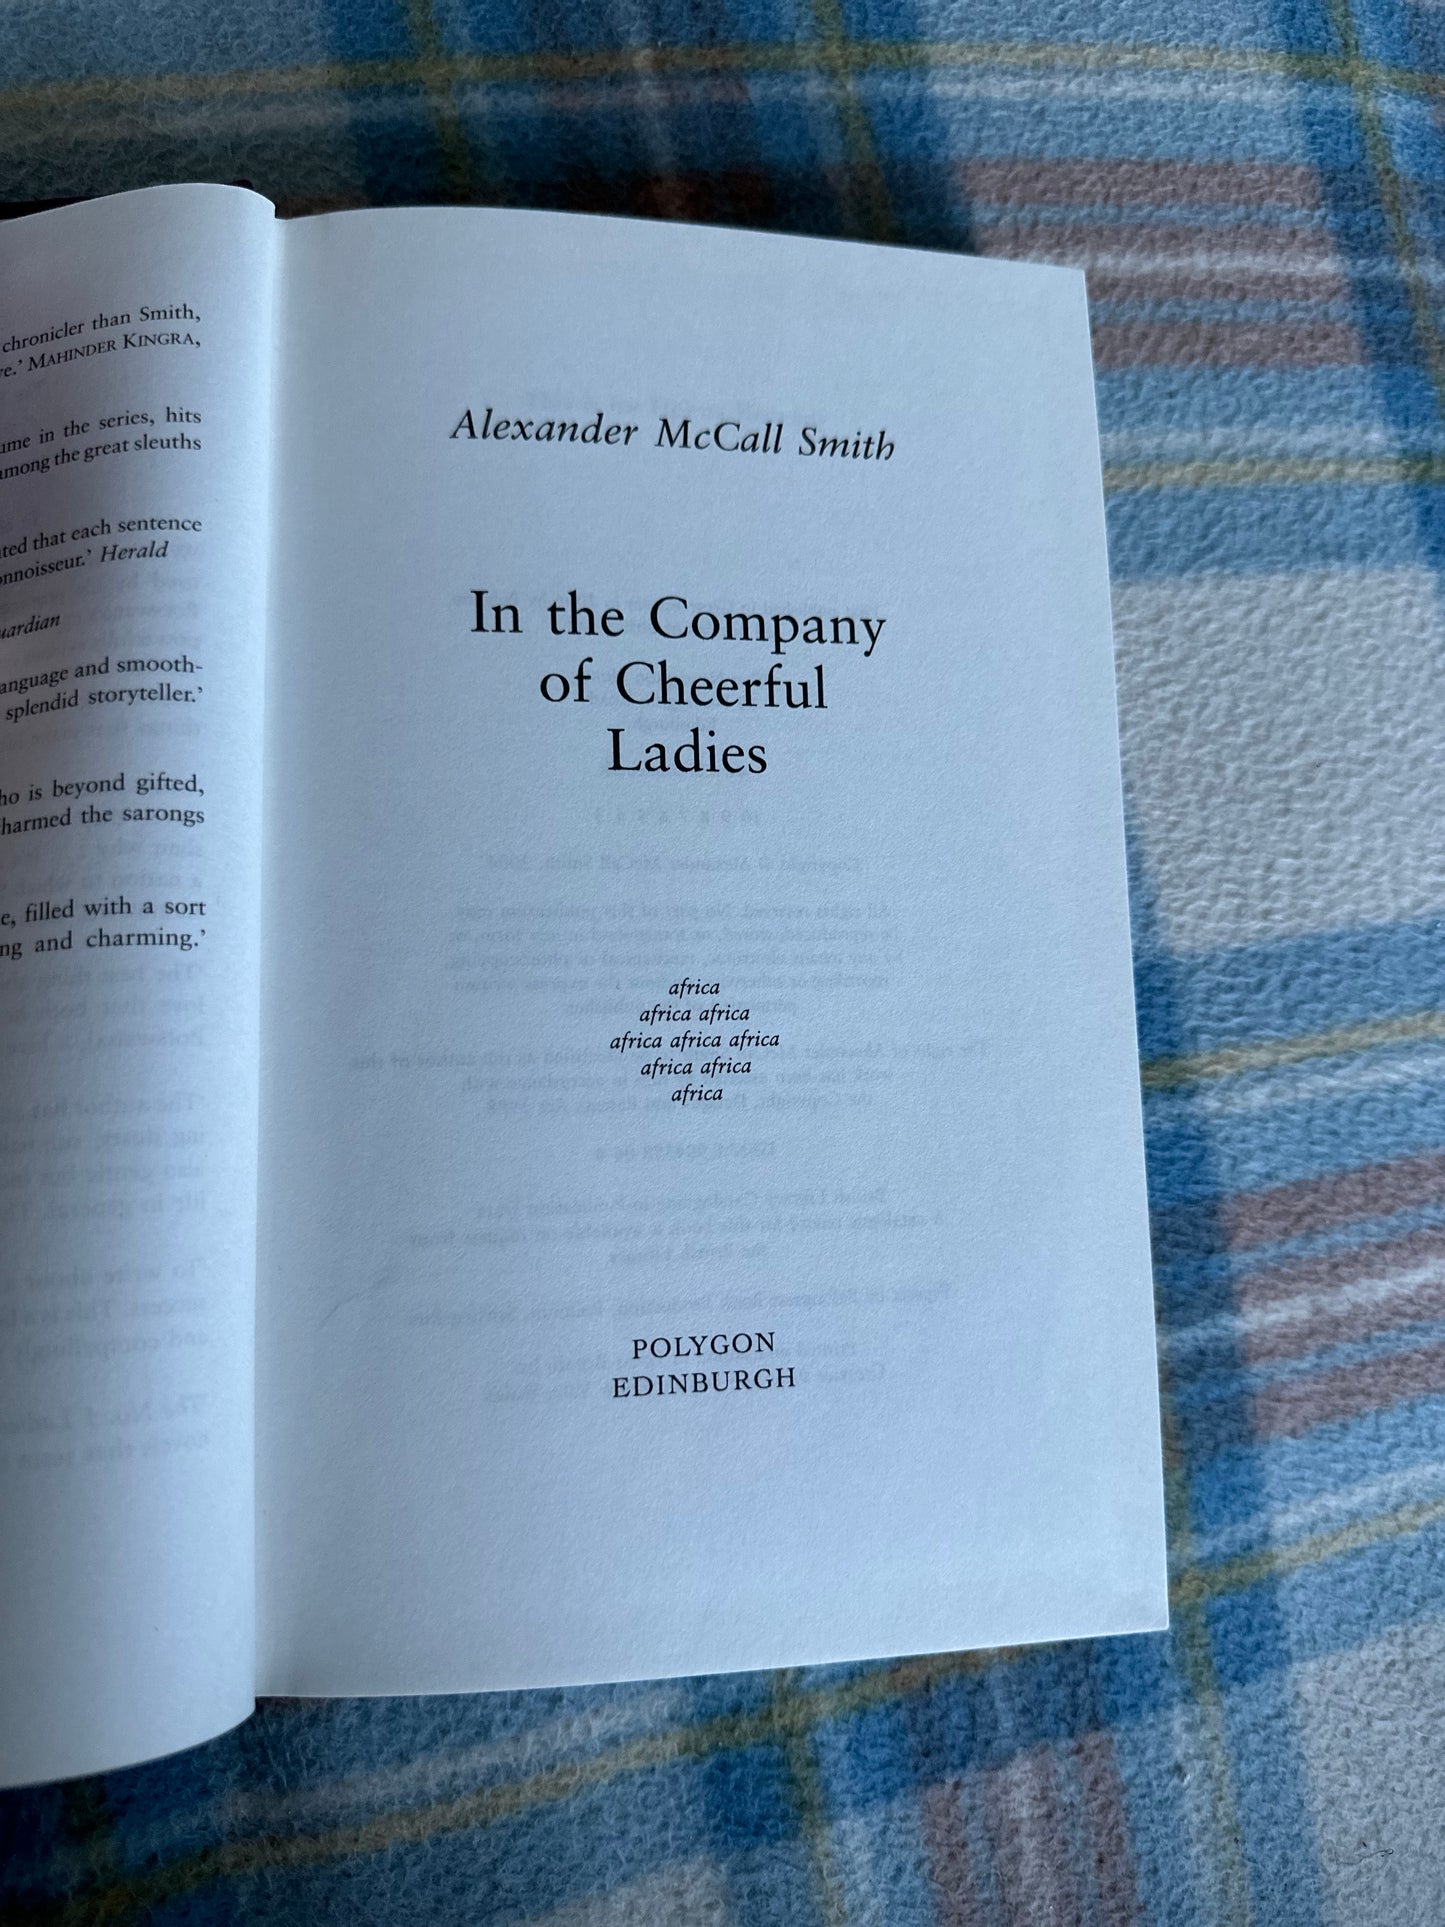 2004 In The Company Of Cheerful Ladies- Alexander McCall Smith(Polygon publisher)